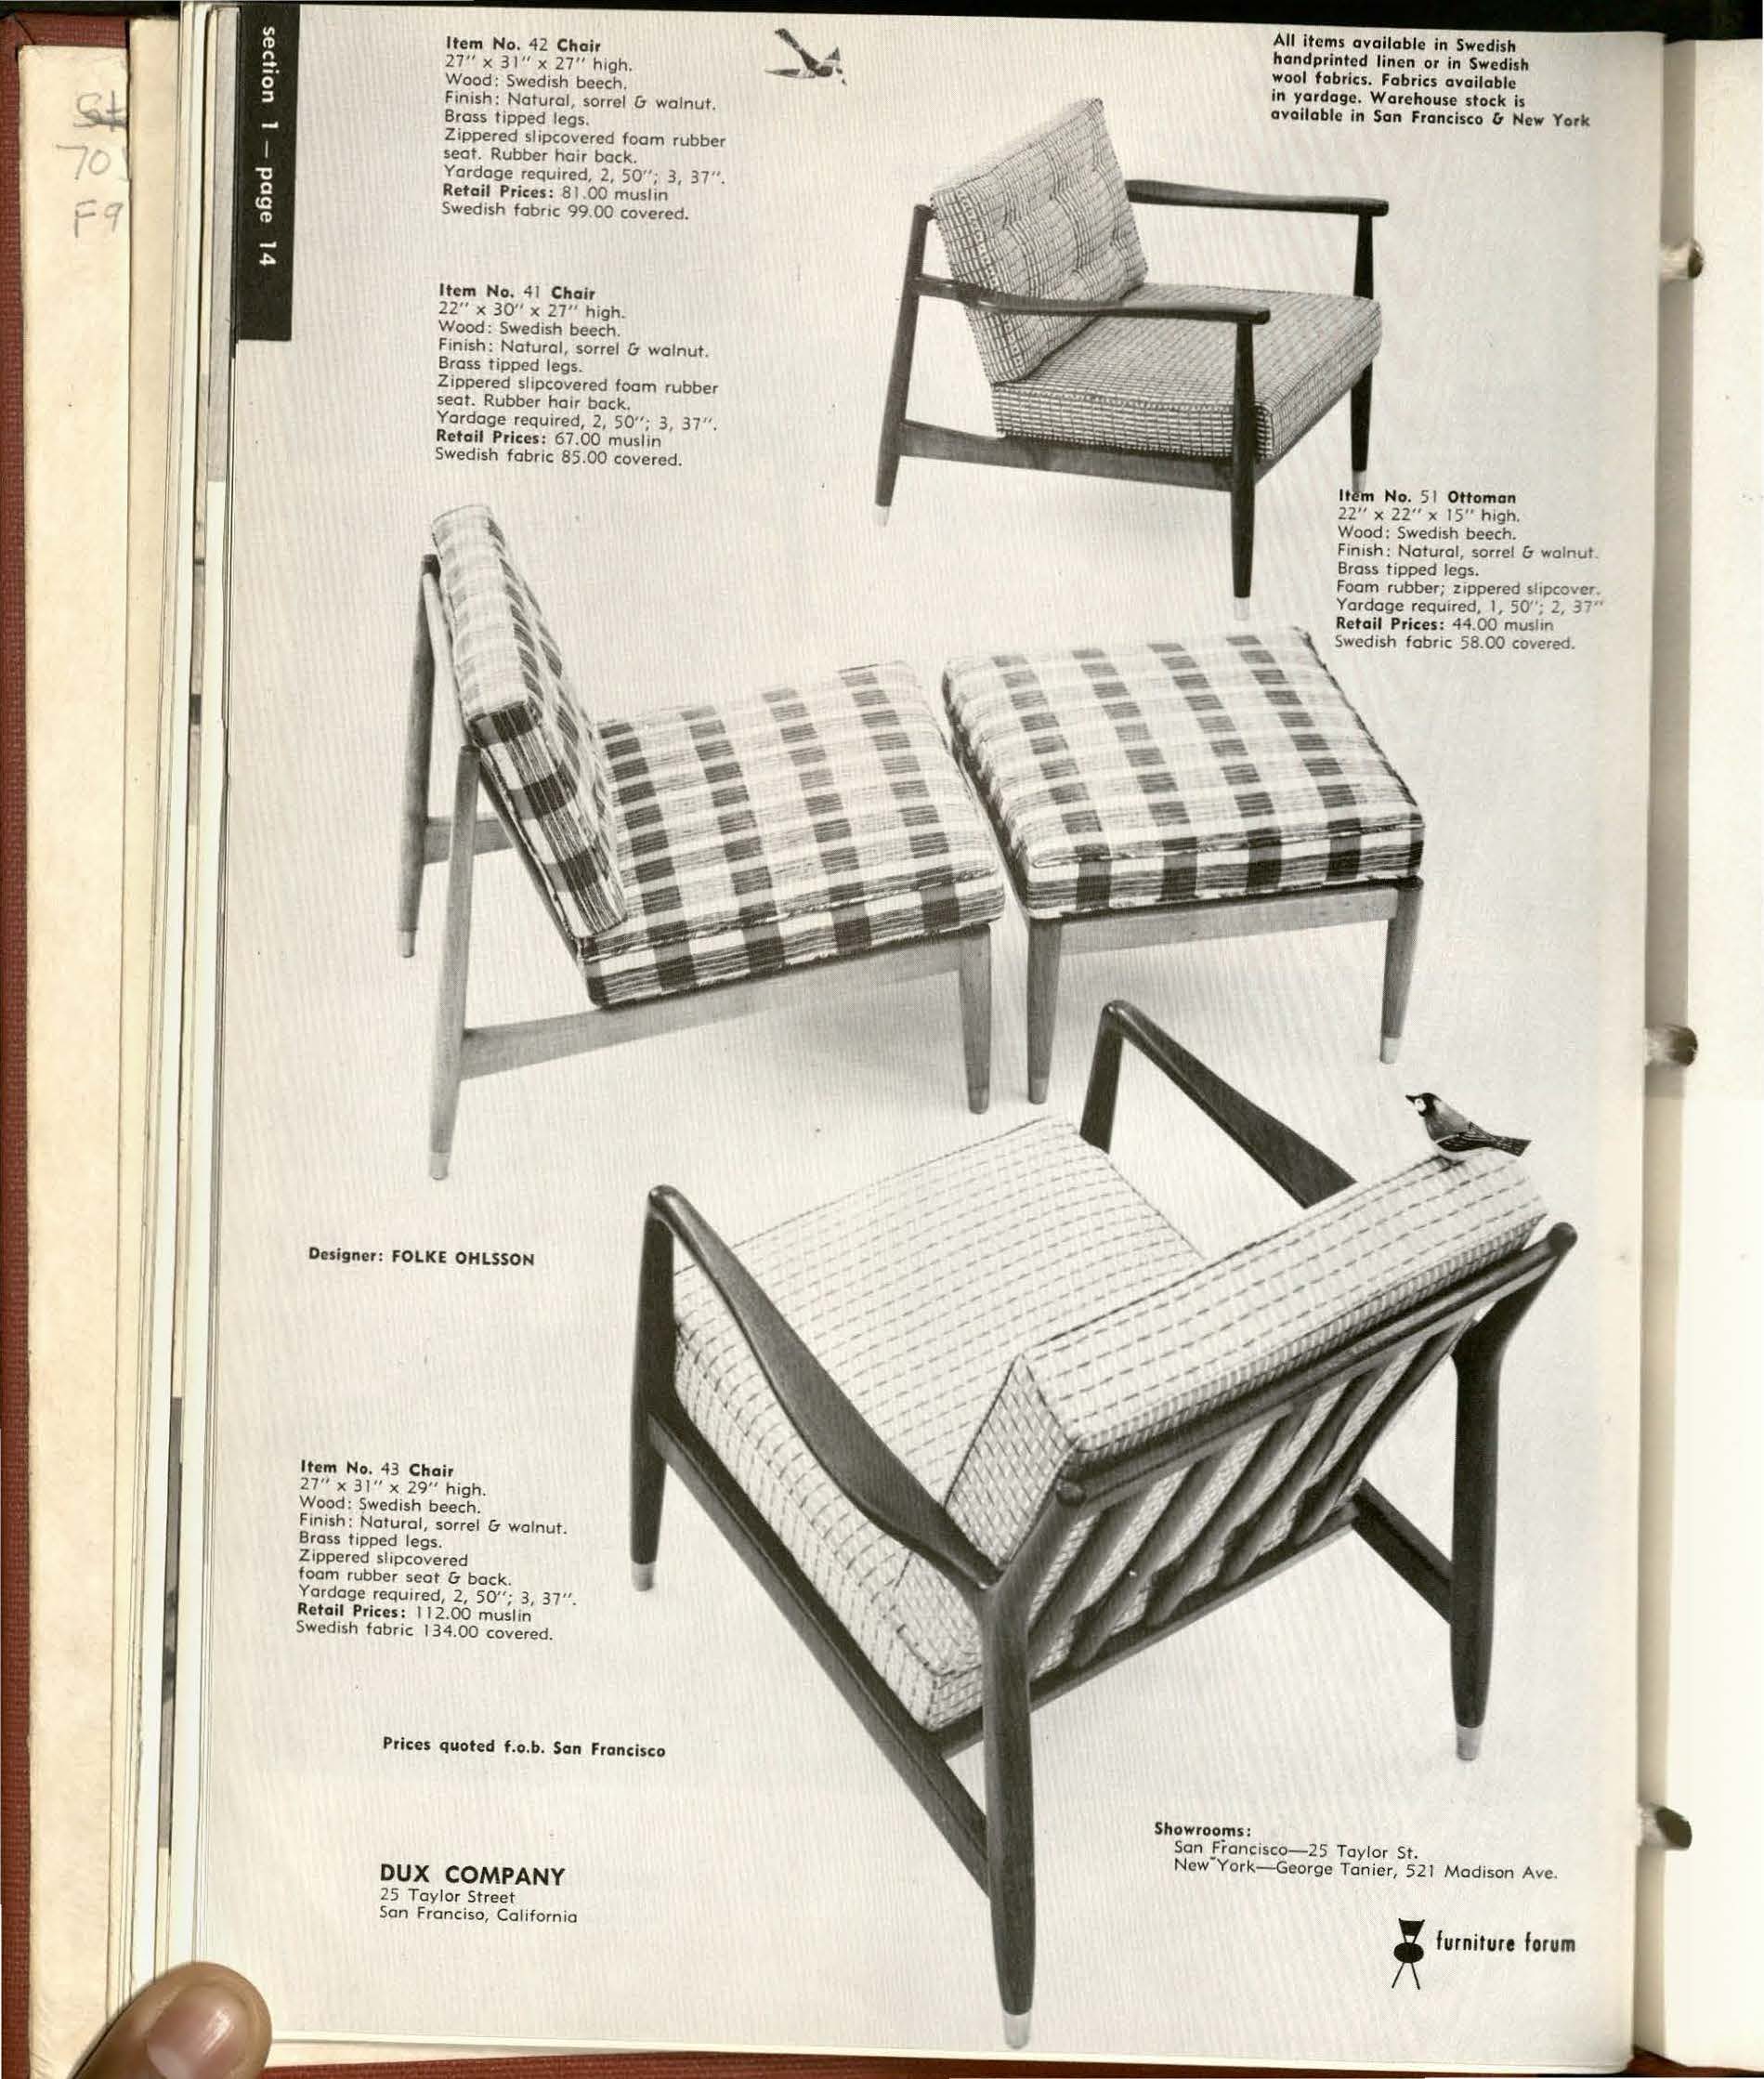 1687548714-Pages-from-Furniture-Forum-1953-OCR.jpg